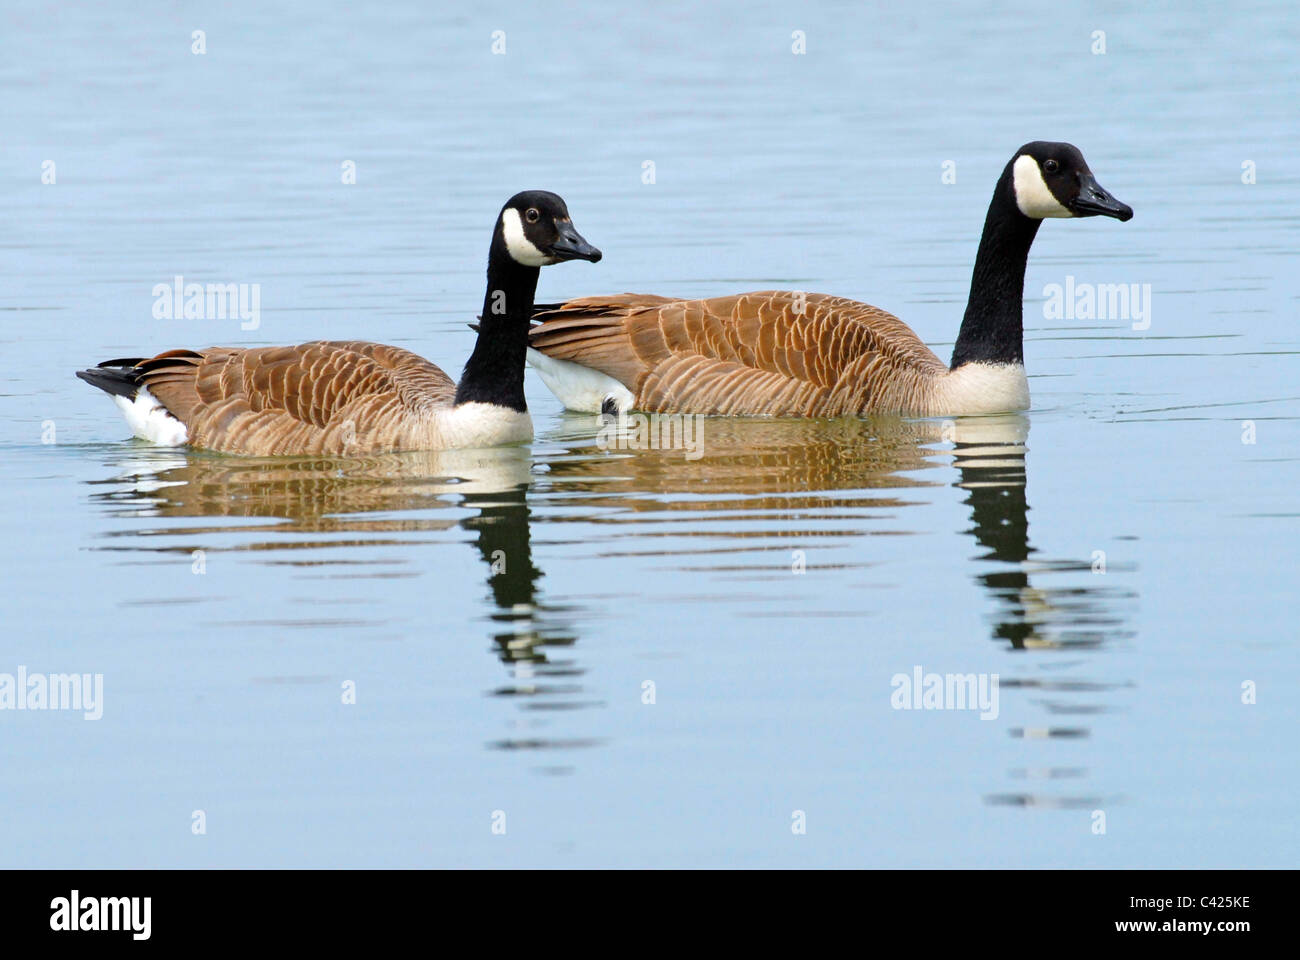 Two Canada geese (Branta canadensis) swimming on blue water Stock Photo